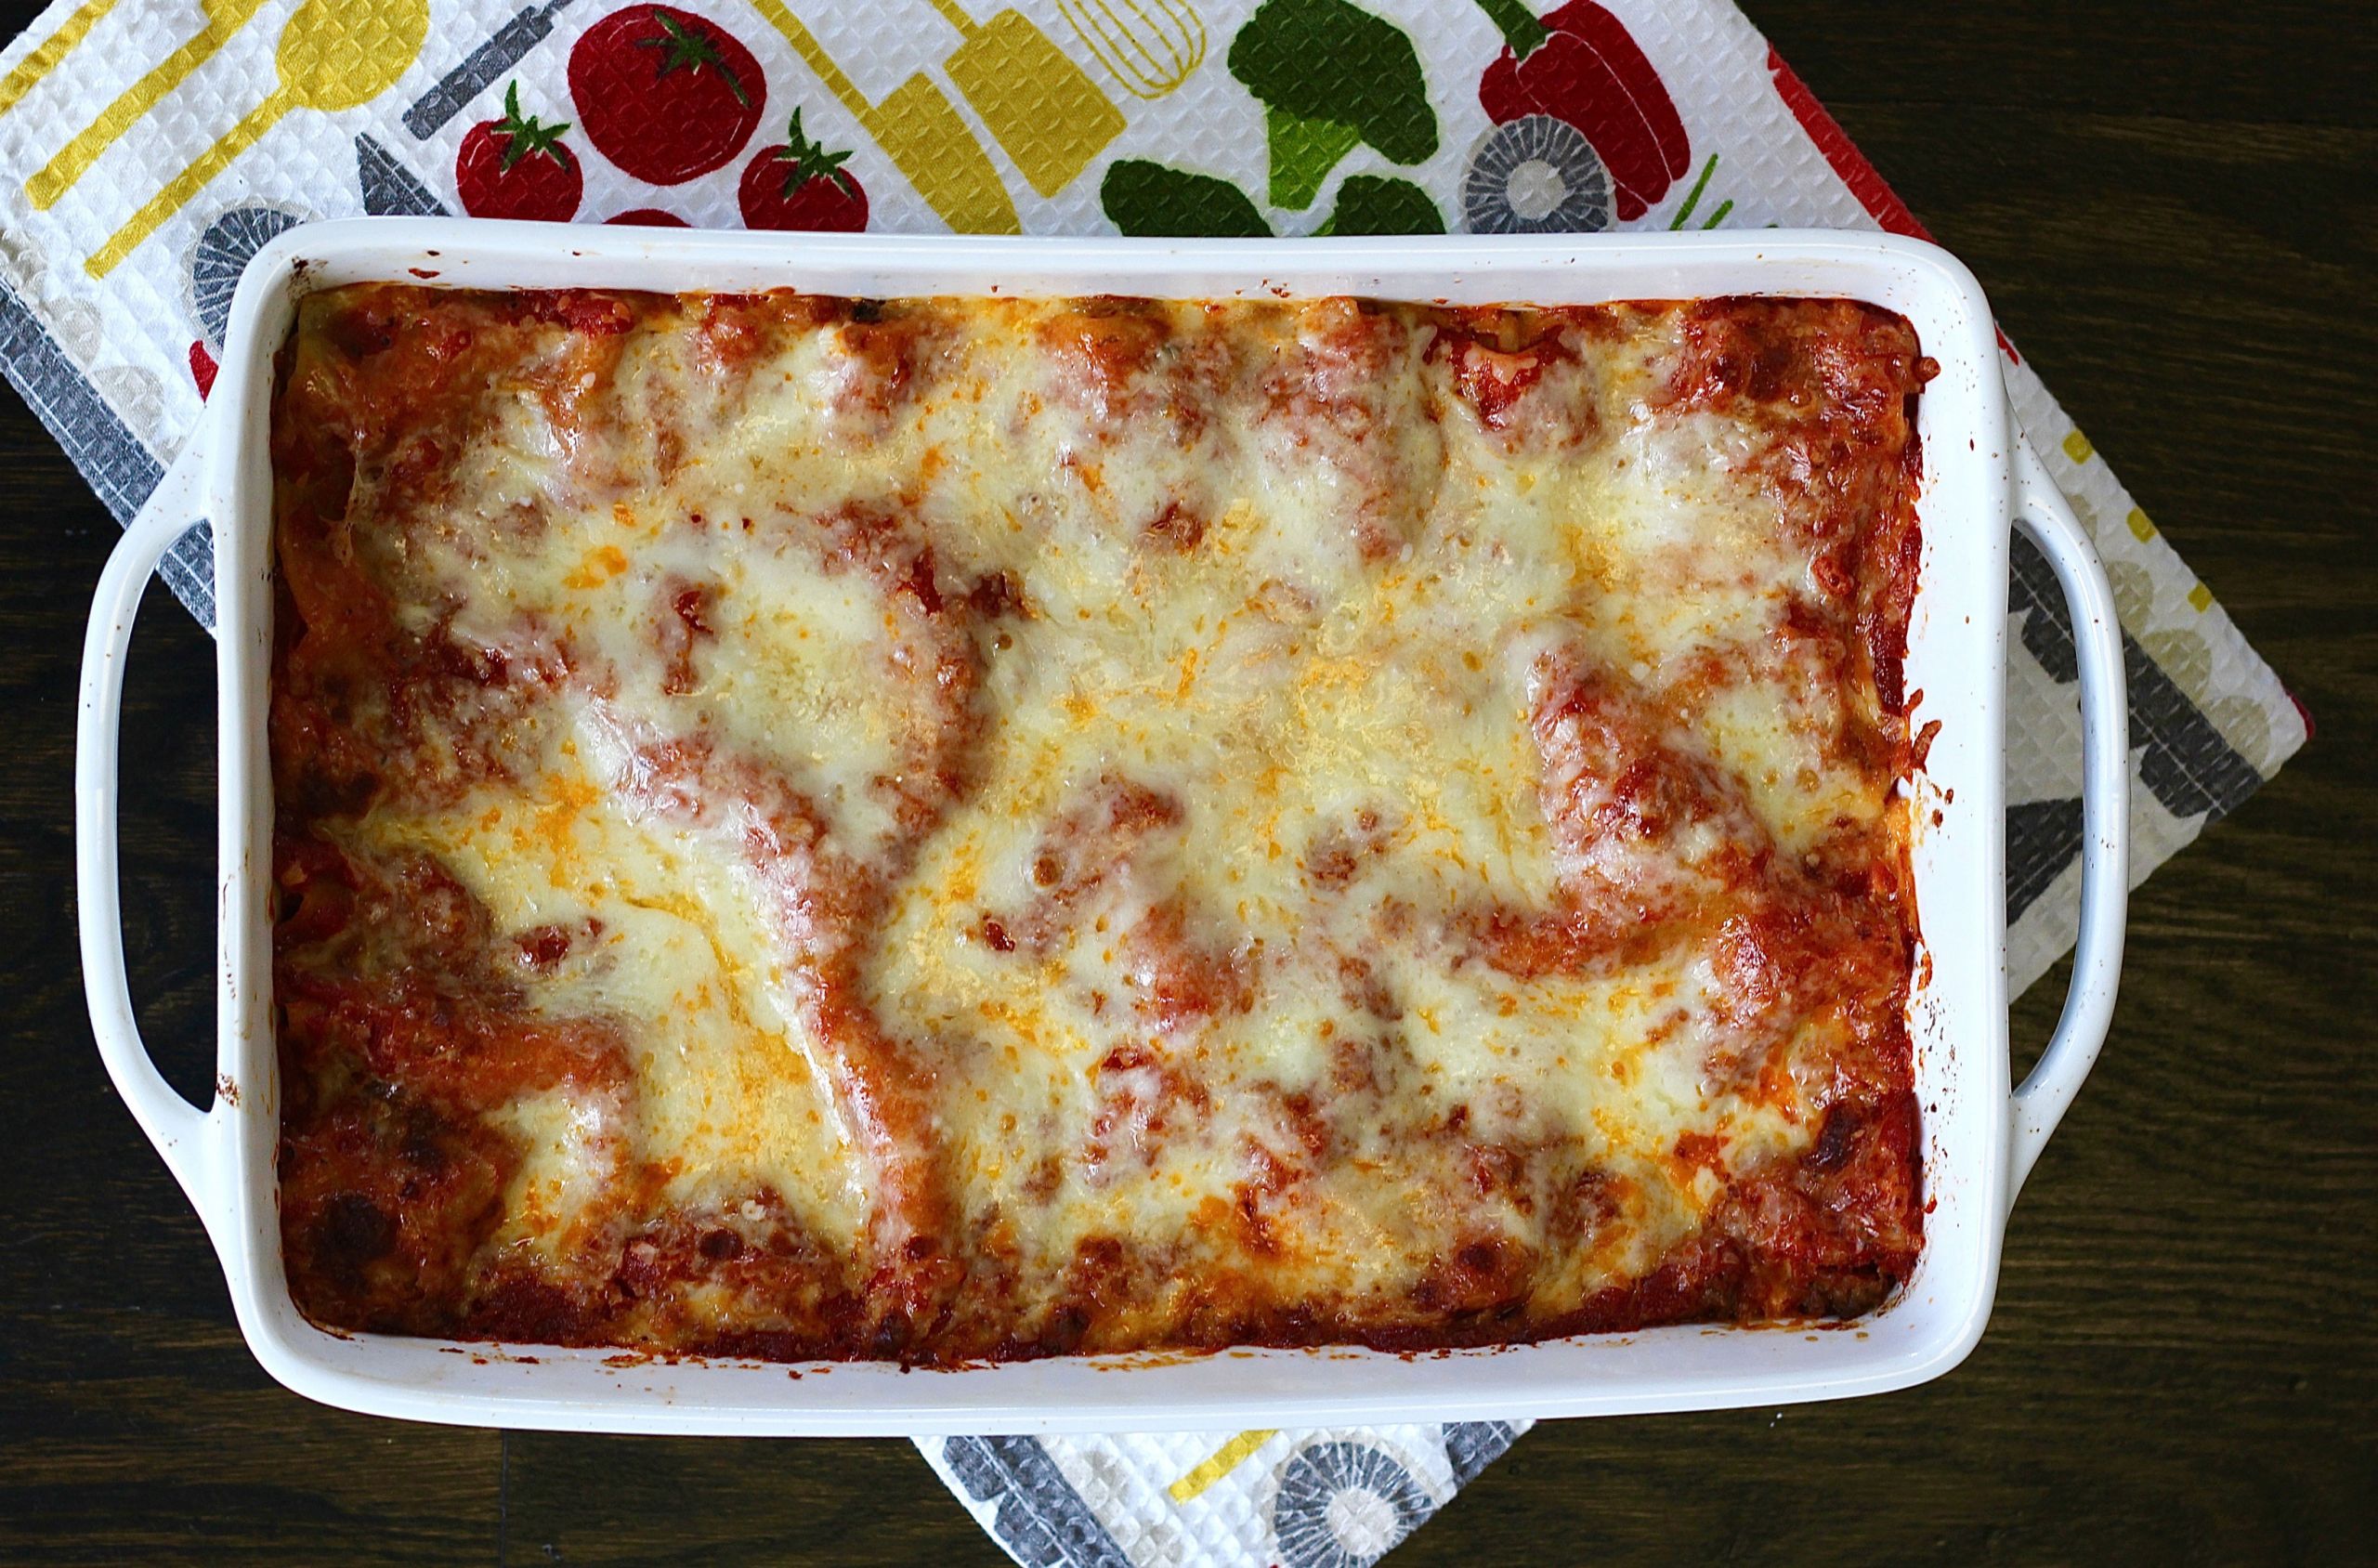 Healthy Turkey Lasagna
 AN EASY WEEKNIGHT RECIPE & TIPS FOR CLEANING UP IN THE